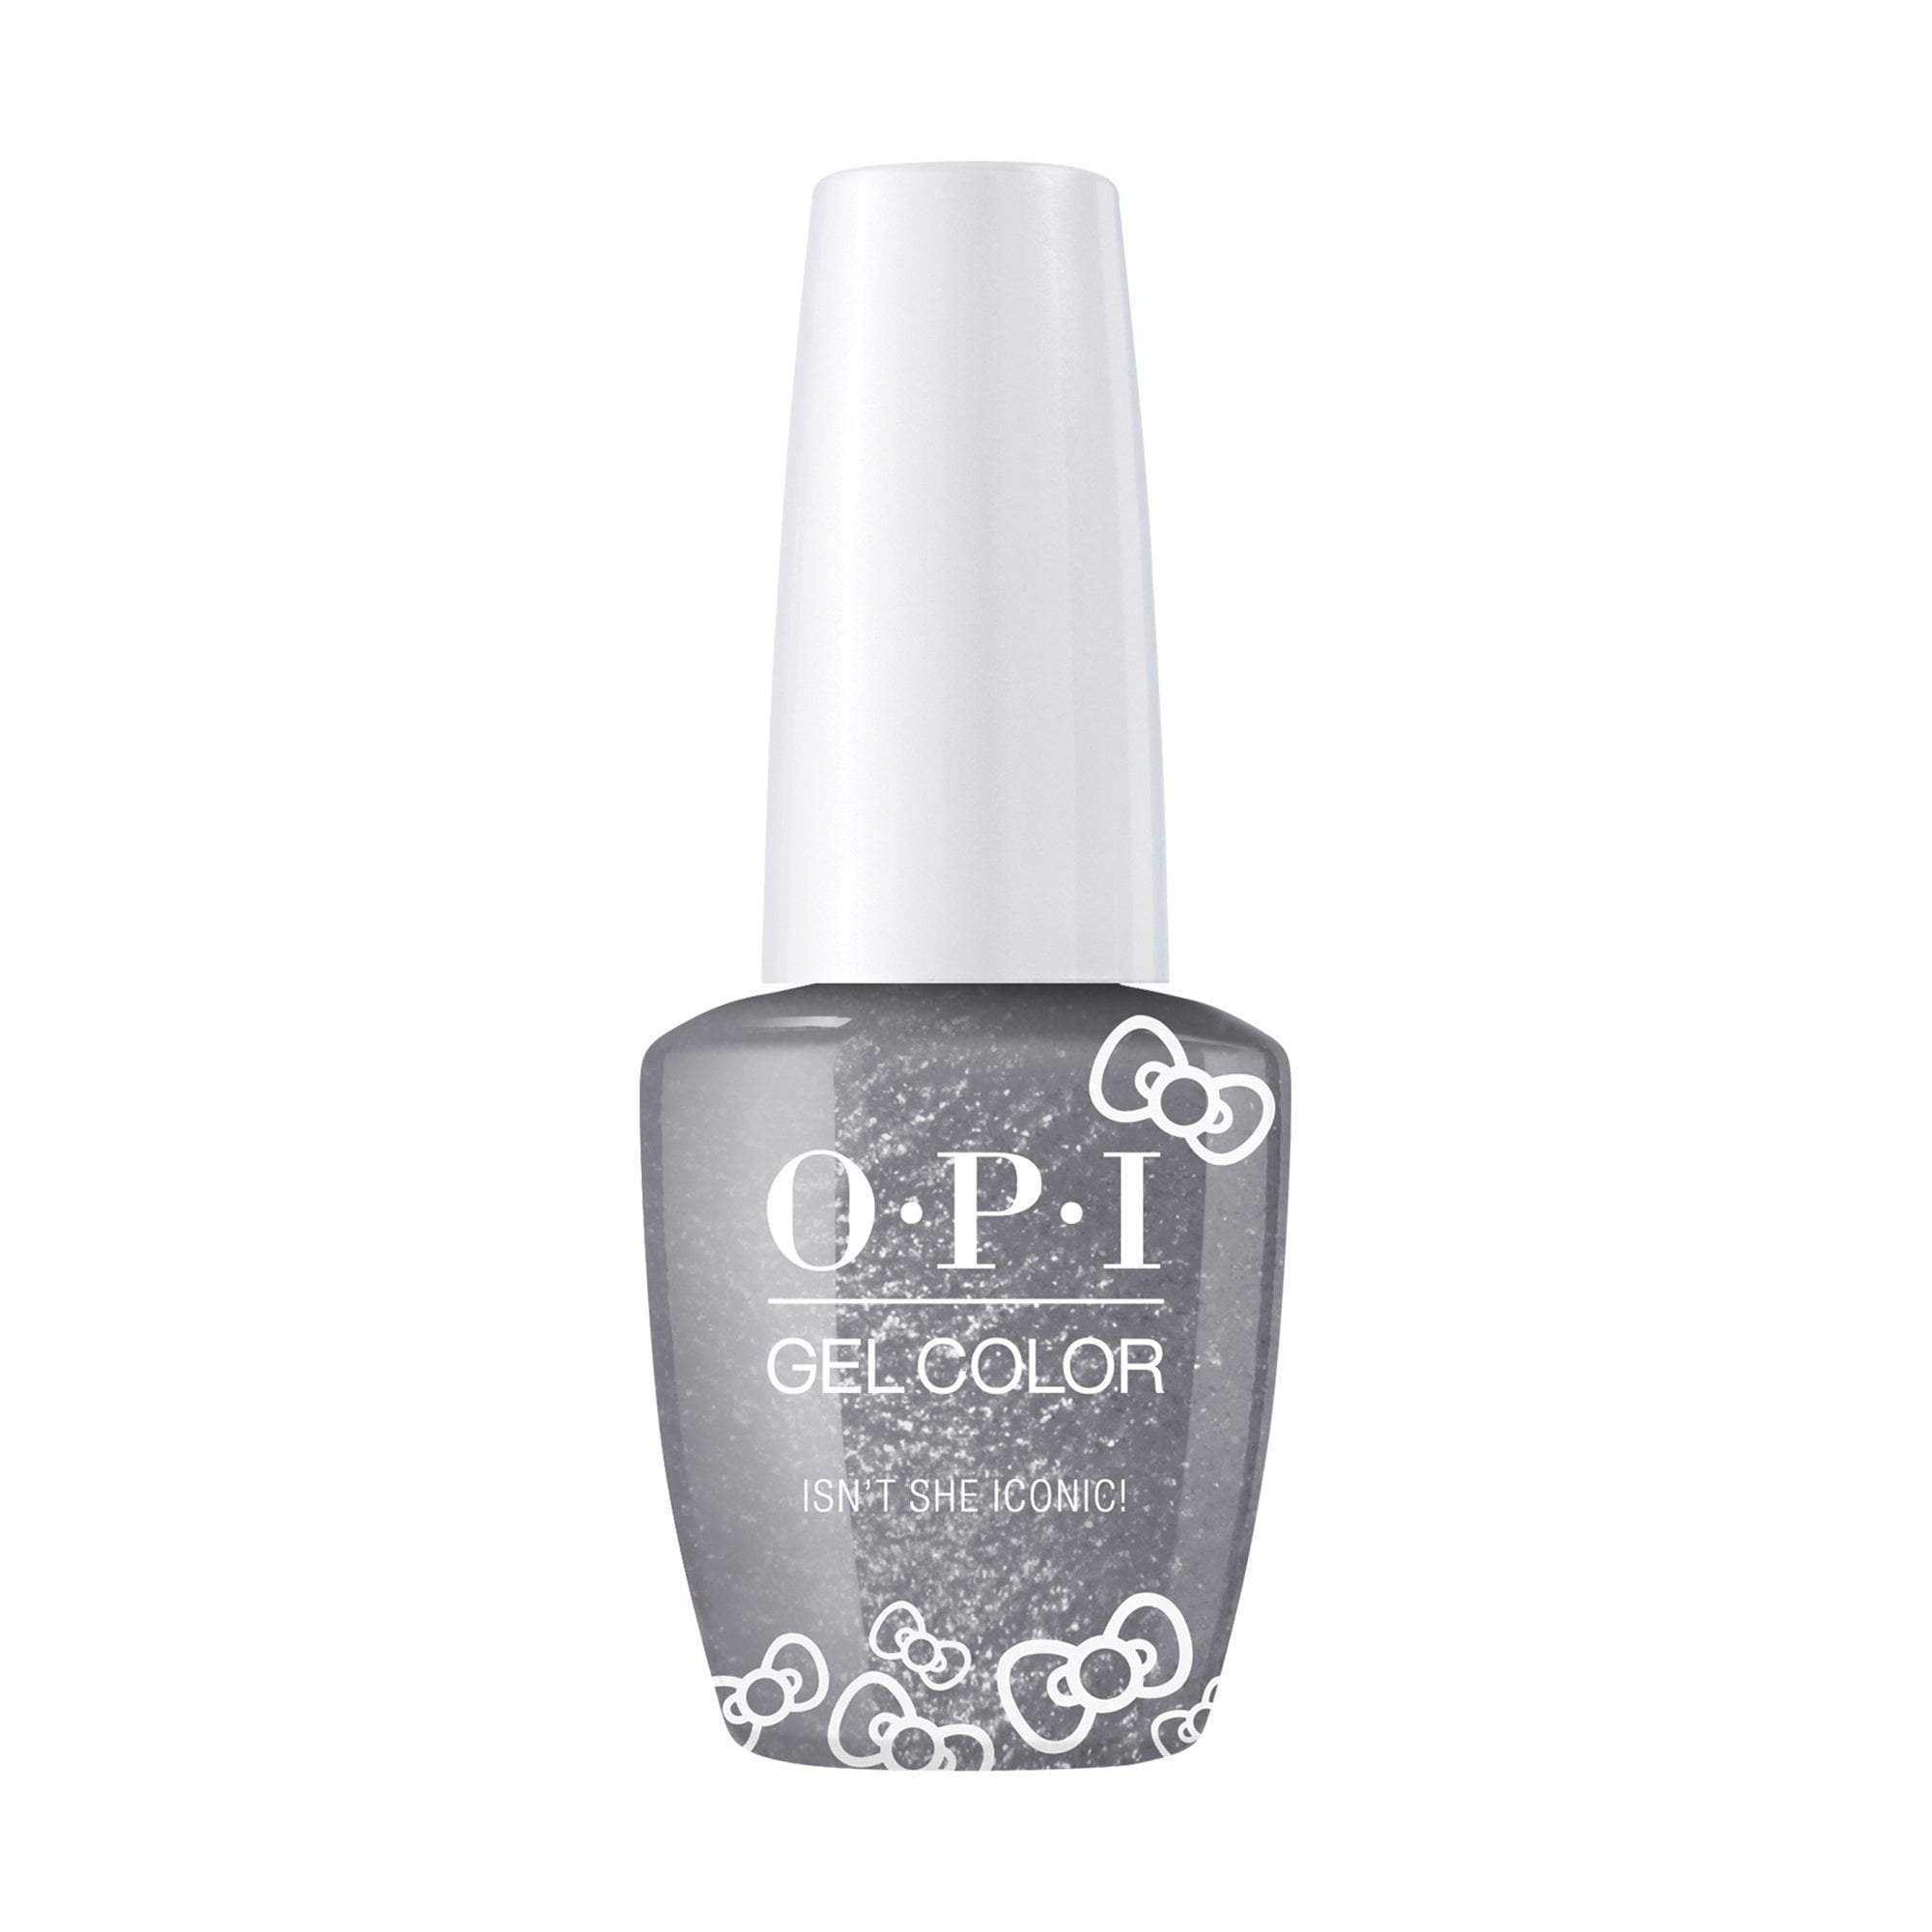 OPI, Hello Kitty GelColor Isn’t She Iconic,  0.5 fl oz